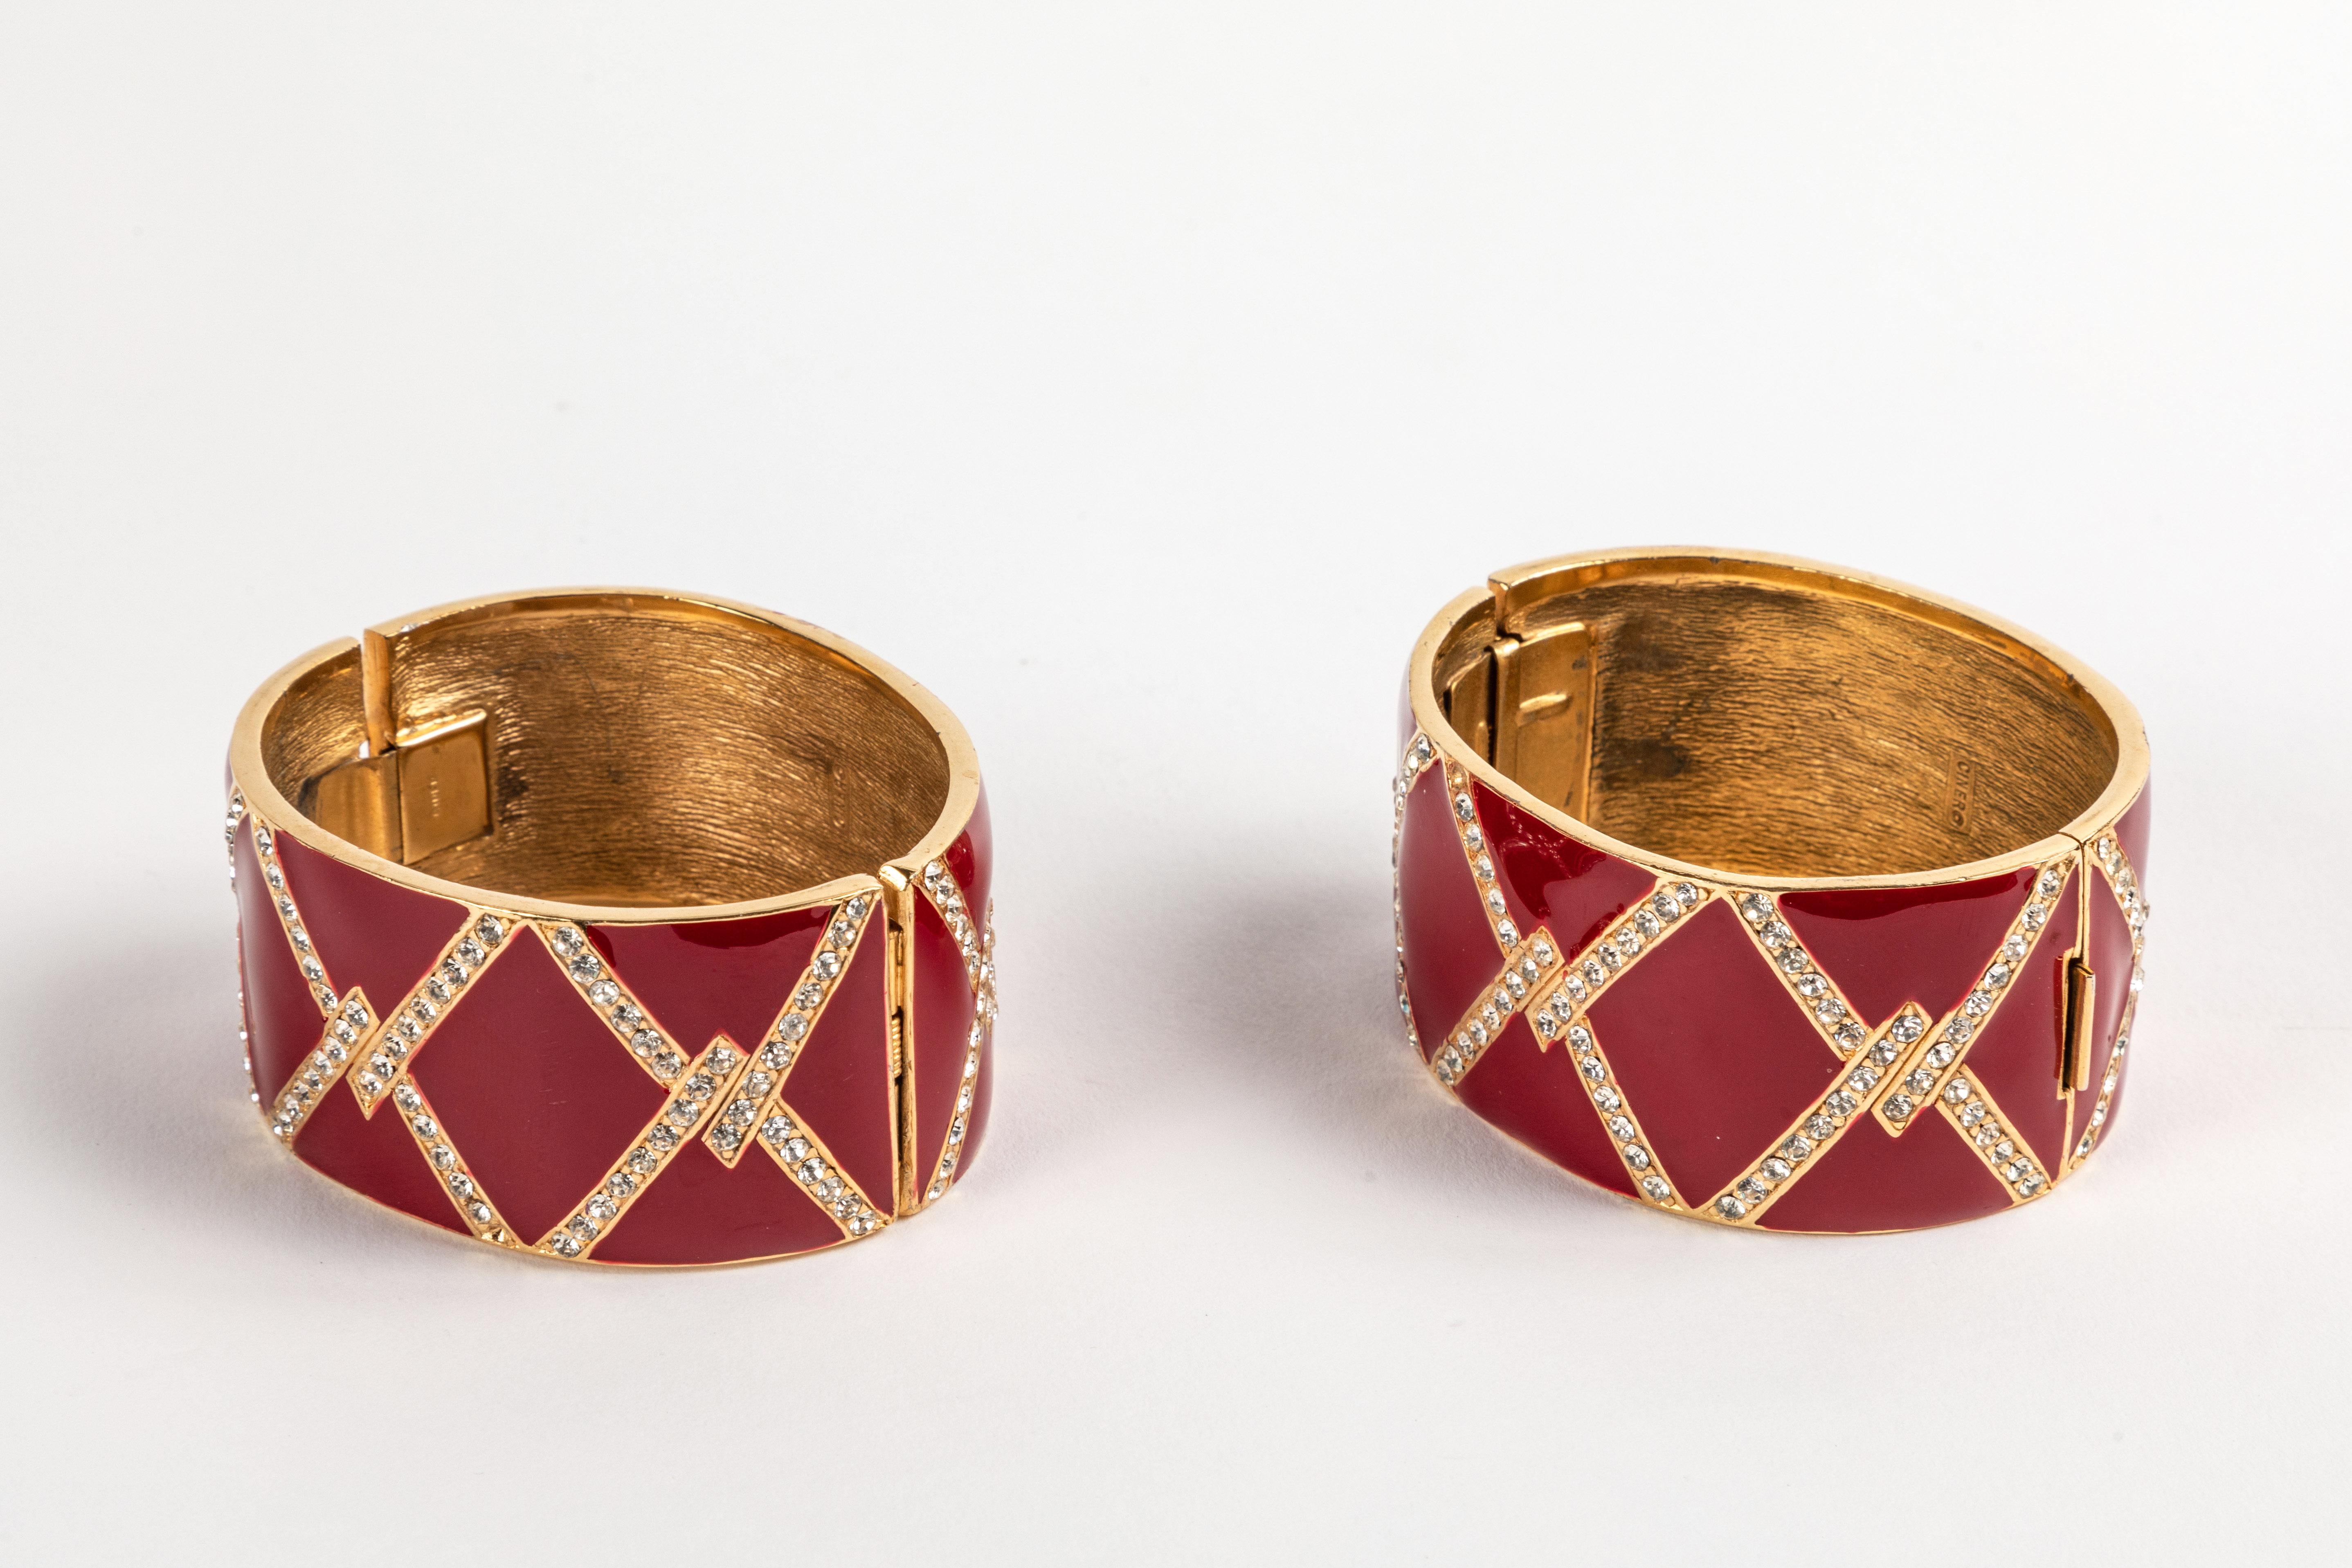 Women's A Pair of Red Enamel and Rhinestone Cuffs by Ciner